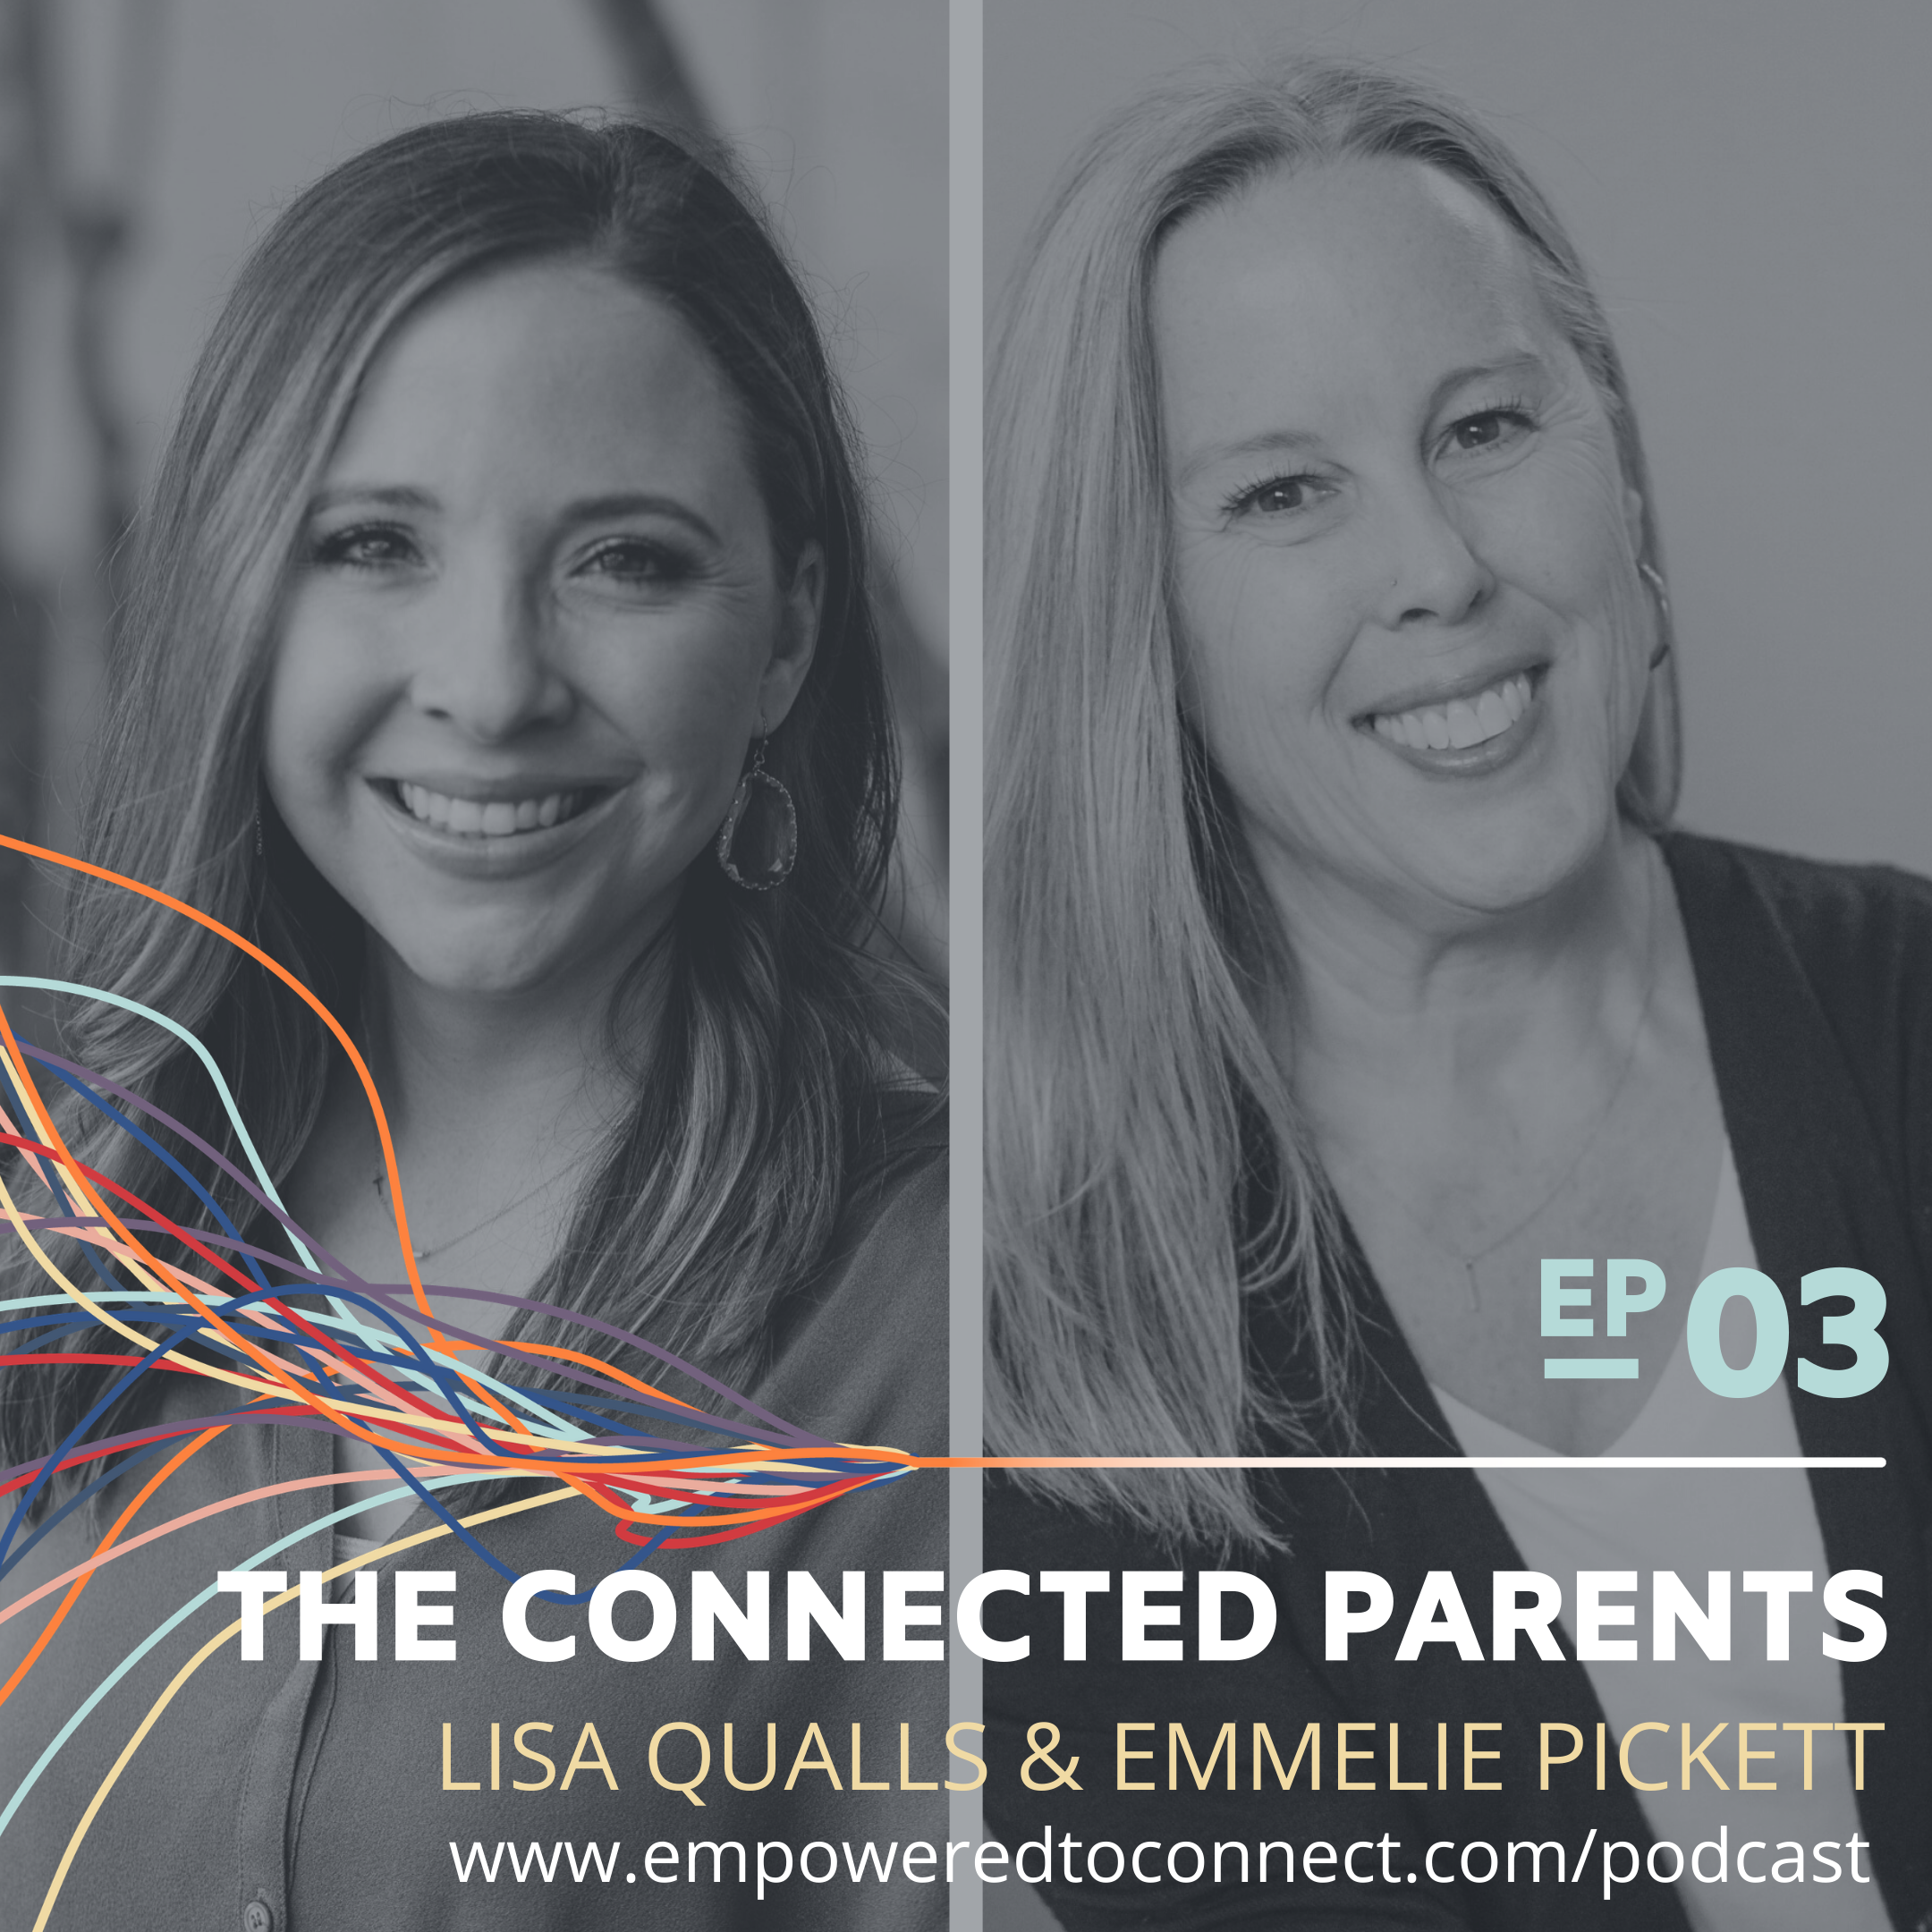 The Connected Parents with Emmelie Pickett and Lisa Qualls - Ep 3